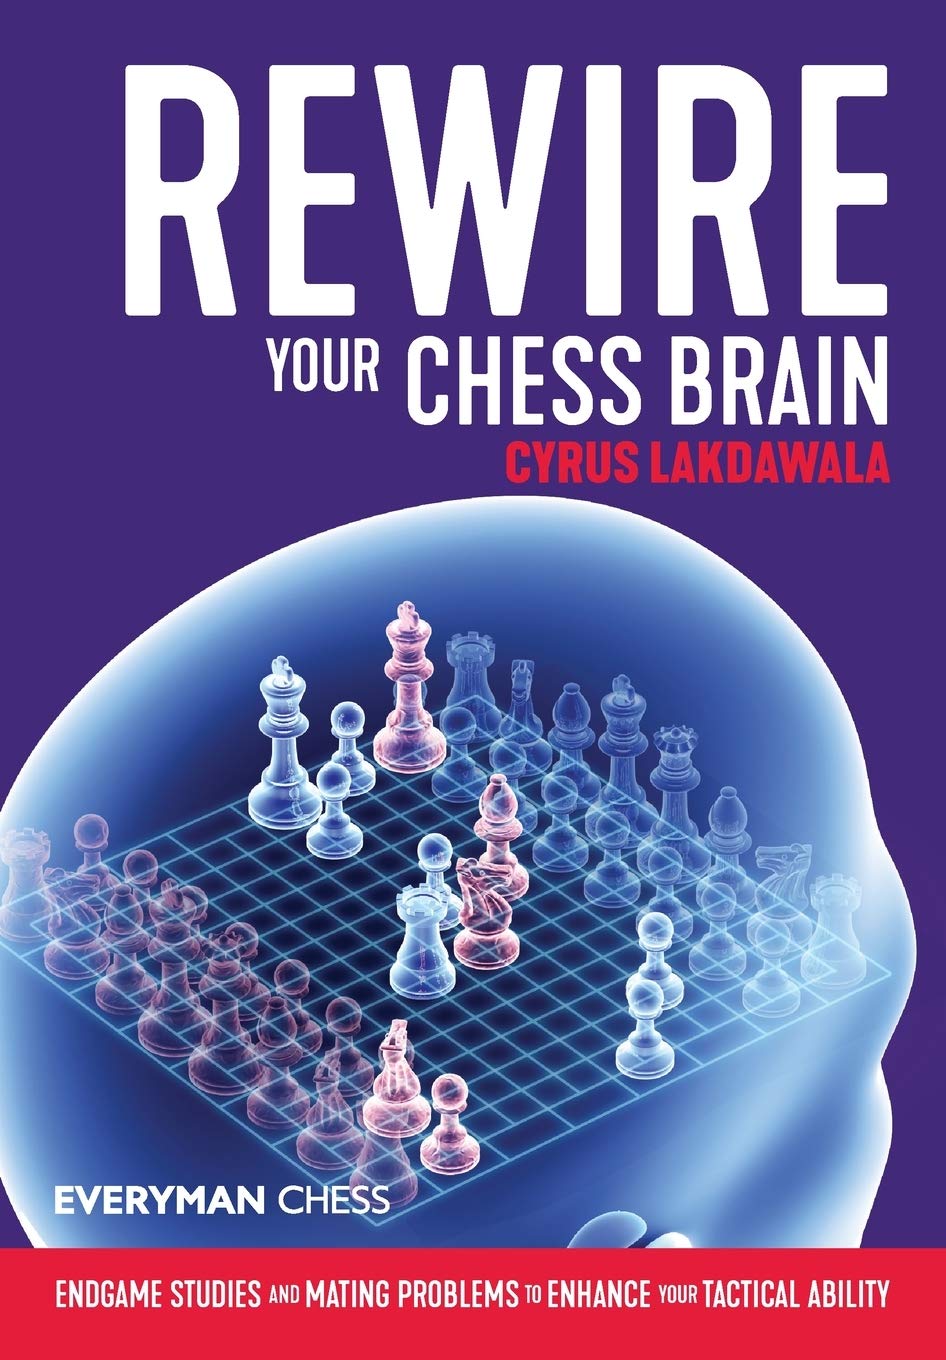 Rewire Your Chess Brain: Endgame studies and mating problems to enhance your tactical ability, Cyrus Lakdawala, Everyman Chess, August 2020